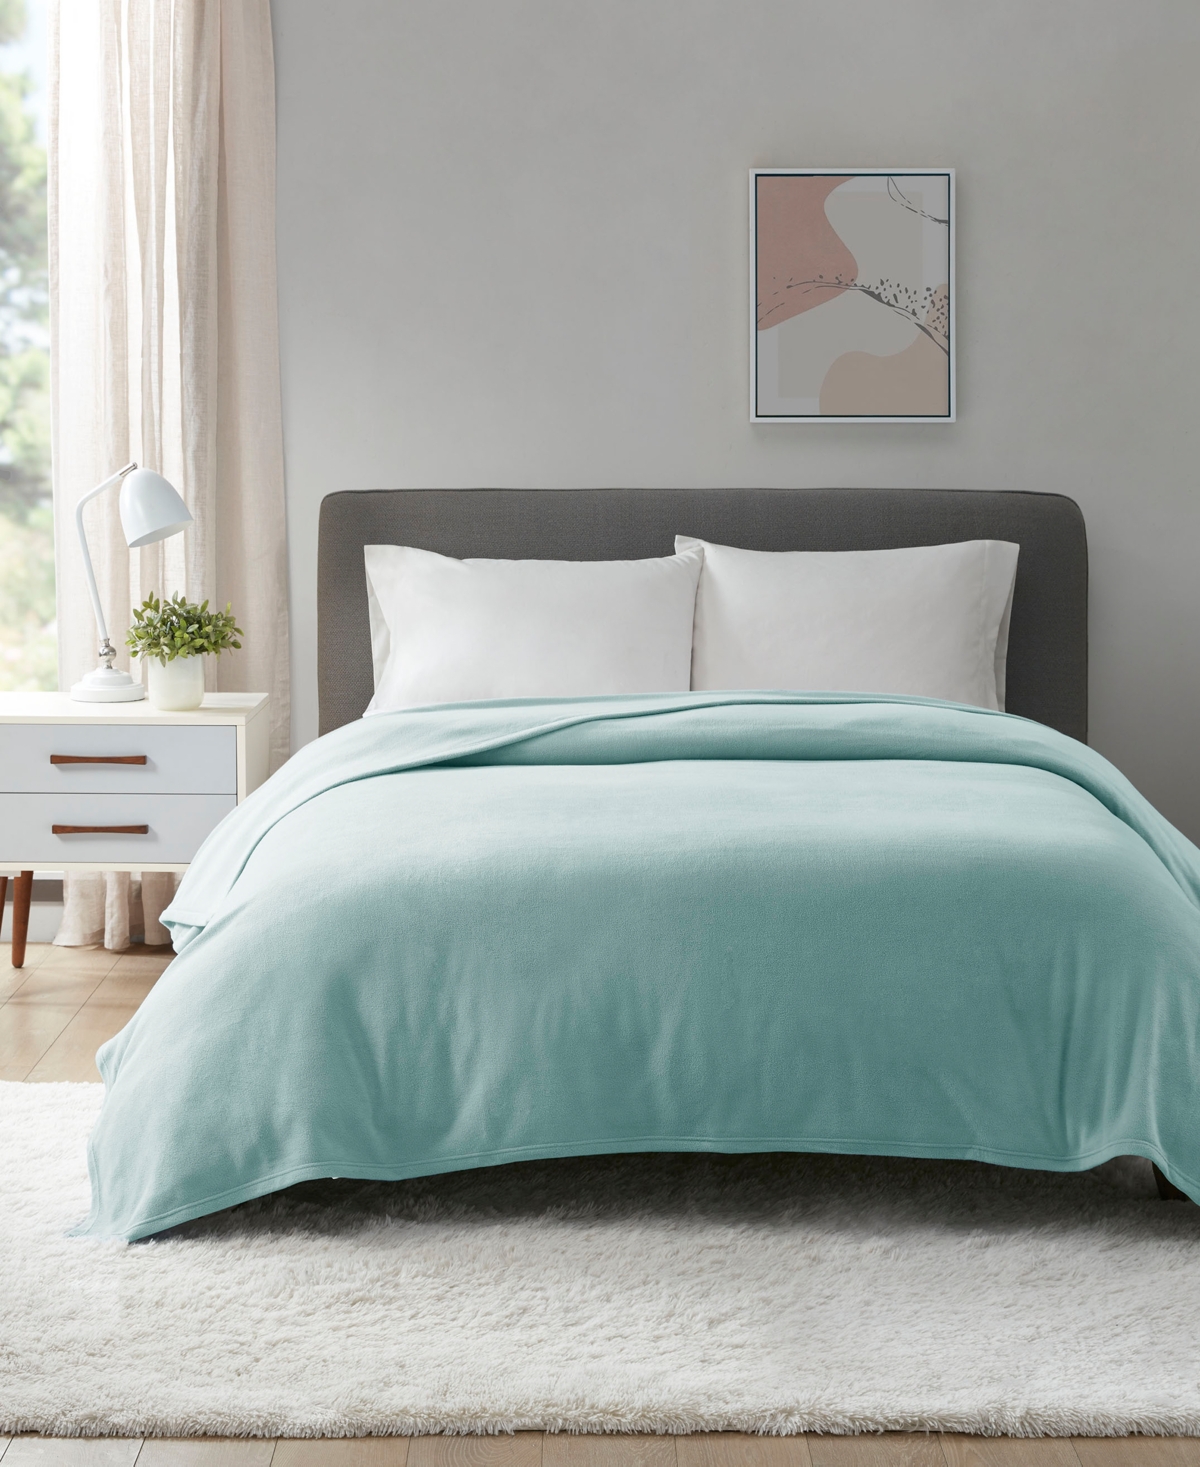 Home Design Easy Care Year-round Soft Fleece Blanket, Full/queen, Created For Macy's In Mint